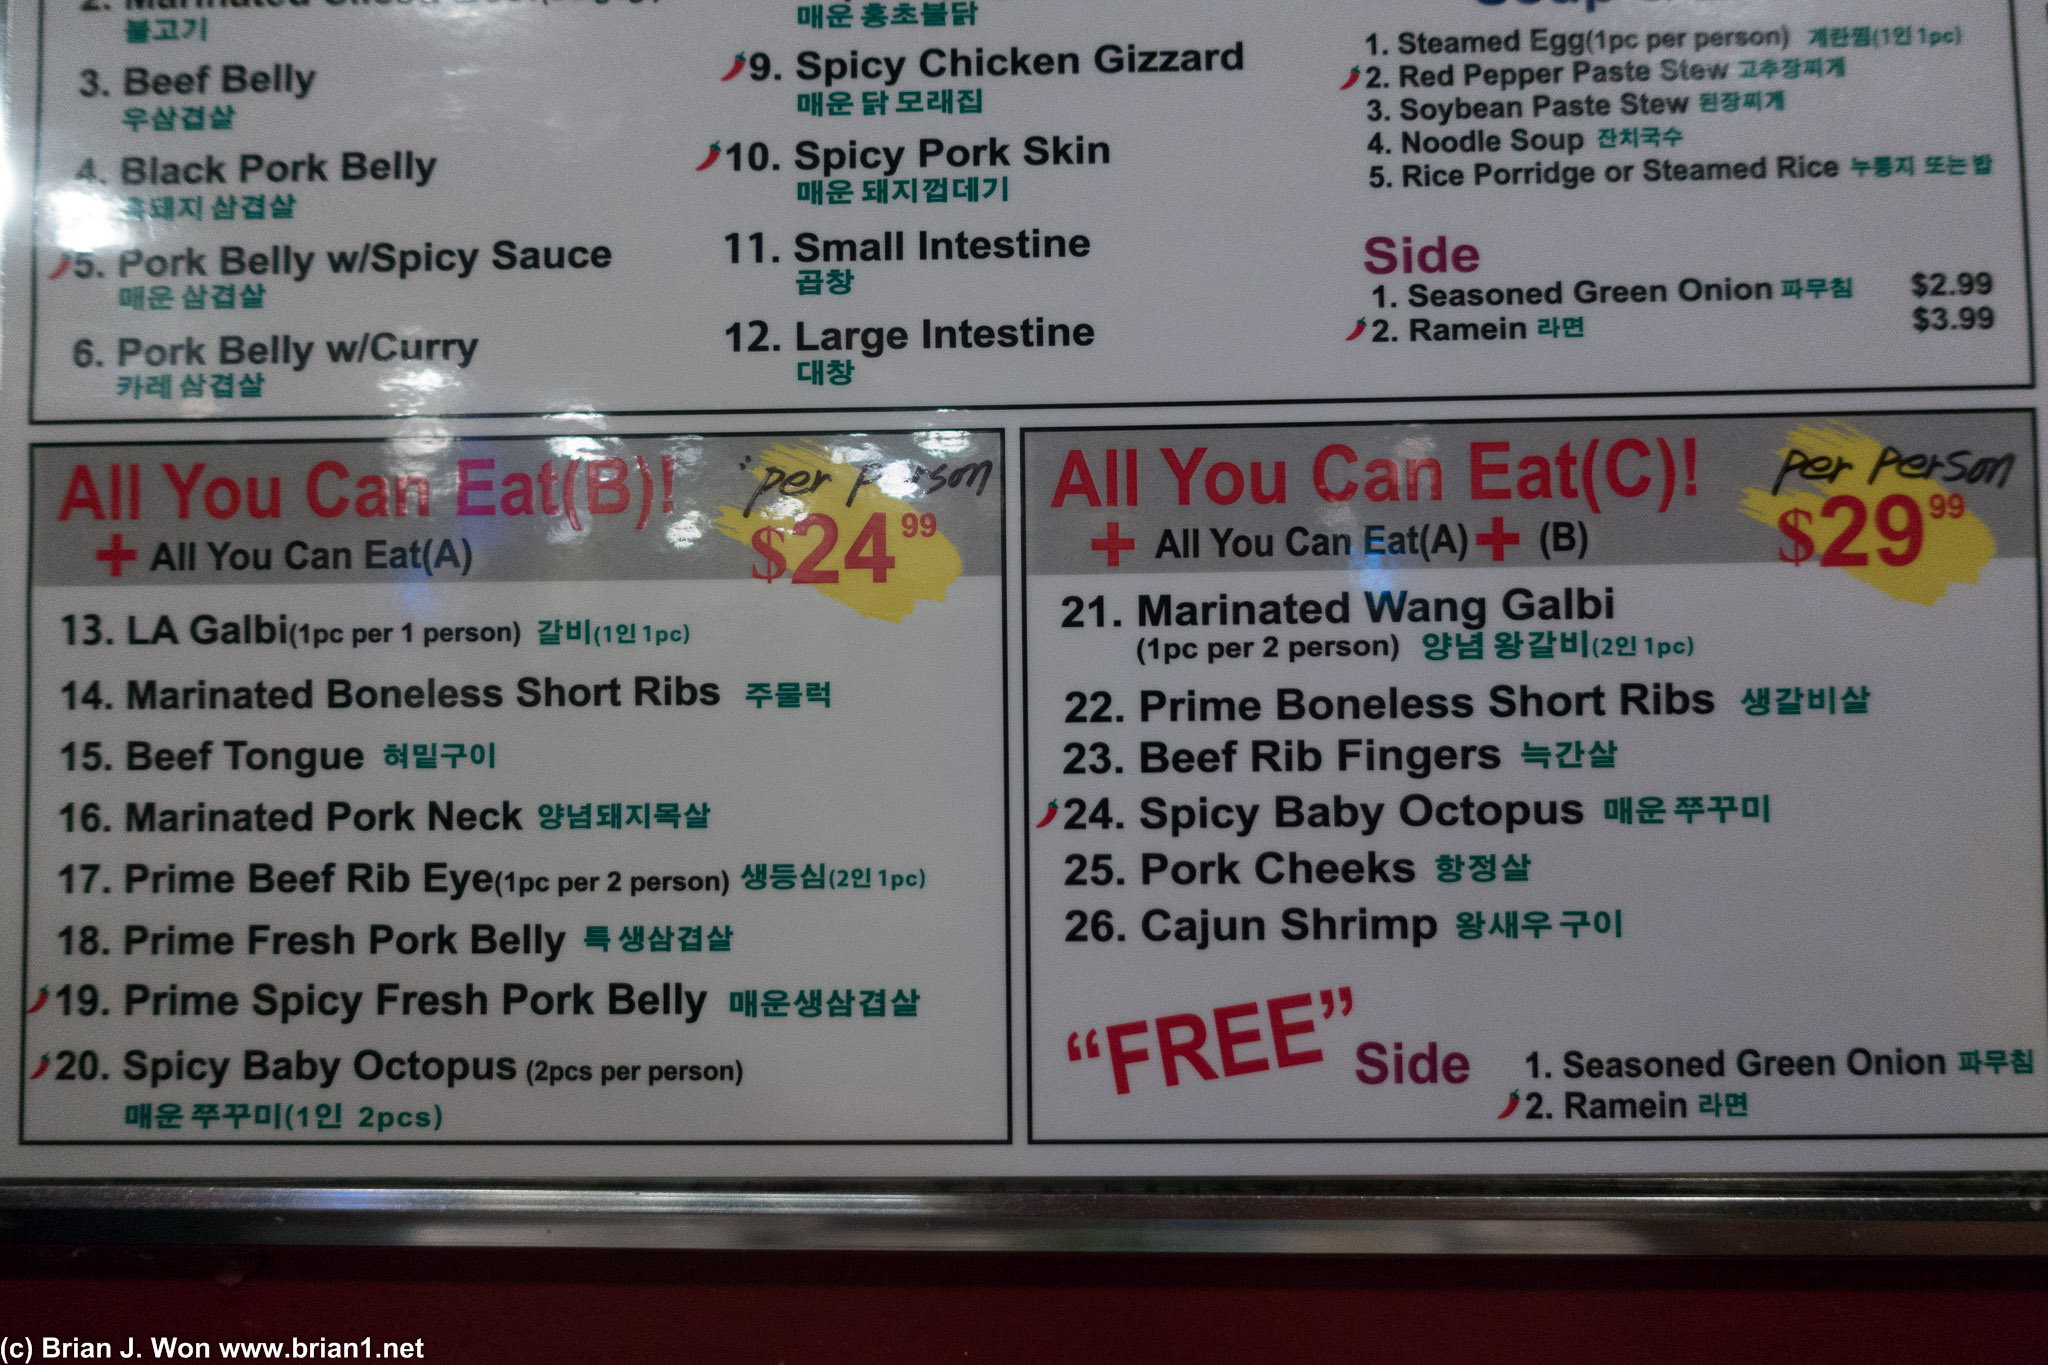 Marinated wang? UHHHH. Also, only 1 piece of galbi per person?!?